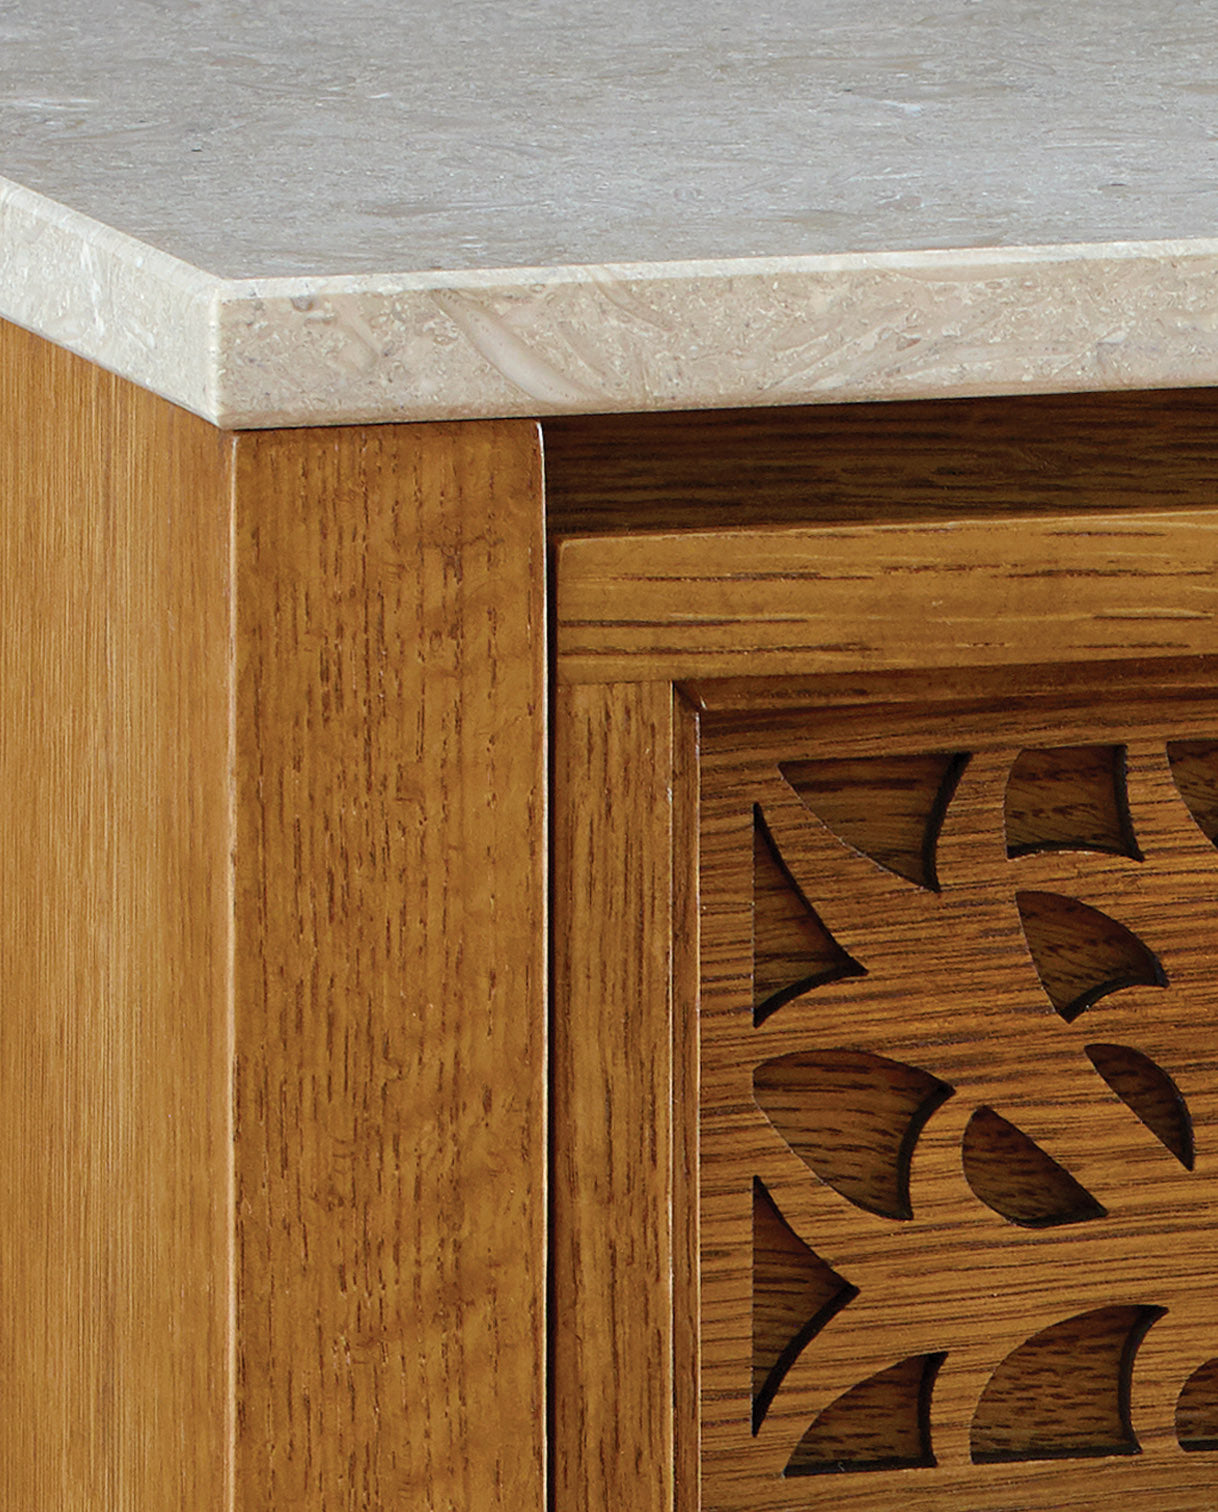 Close up showing Surrey Hills stone top nightstand 